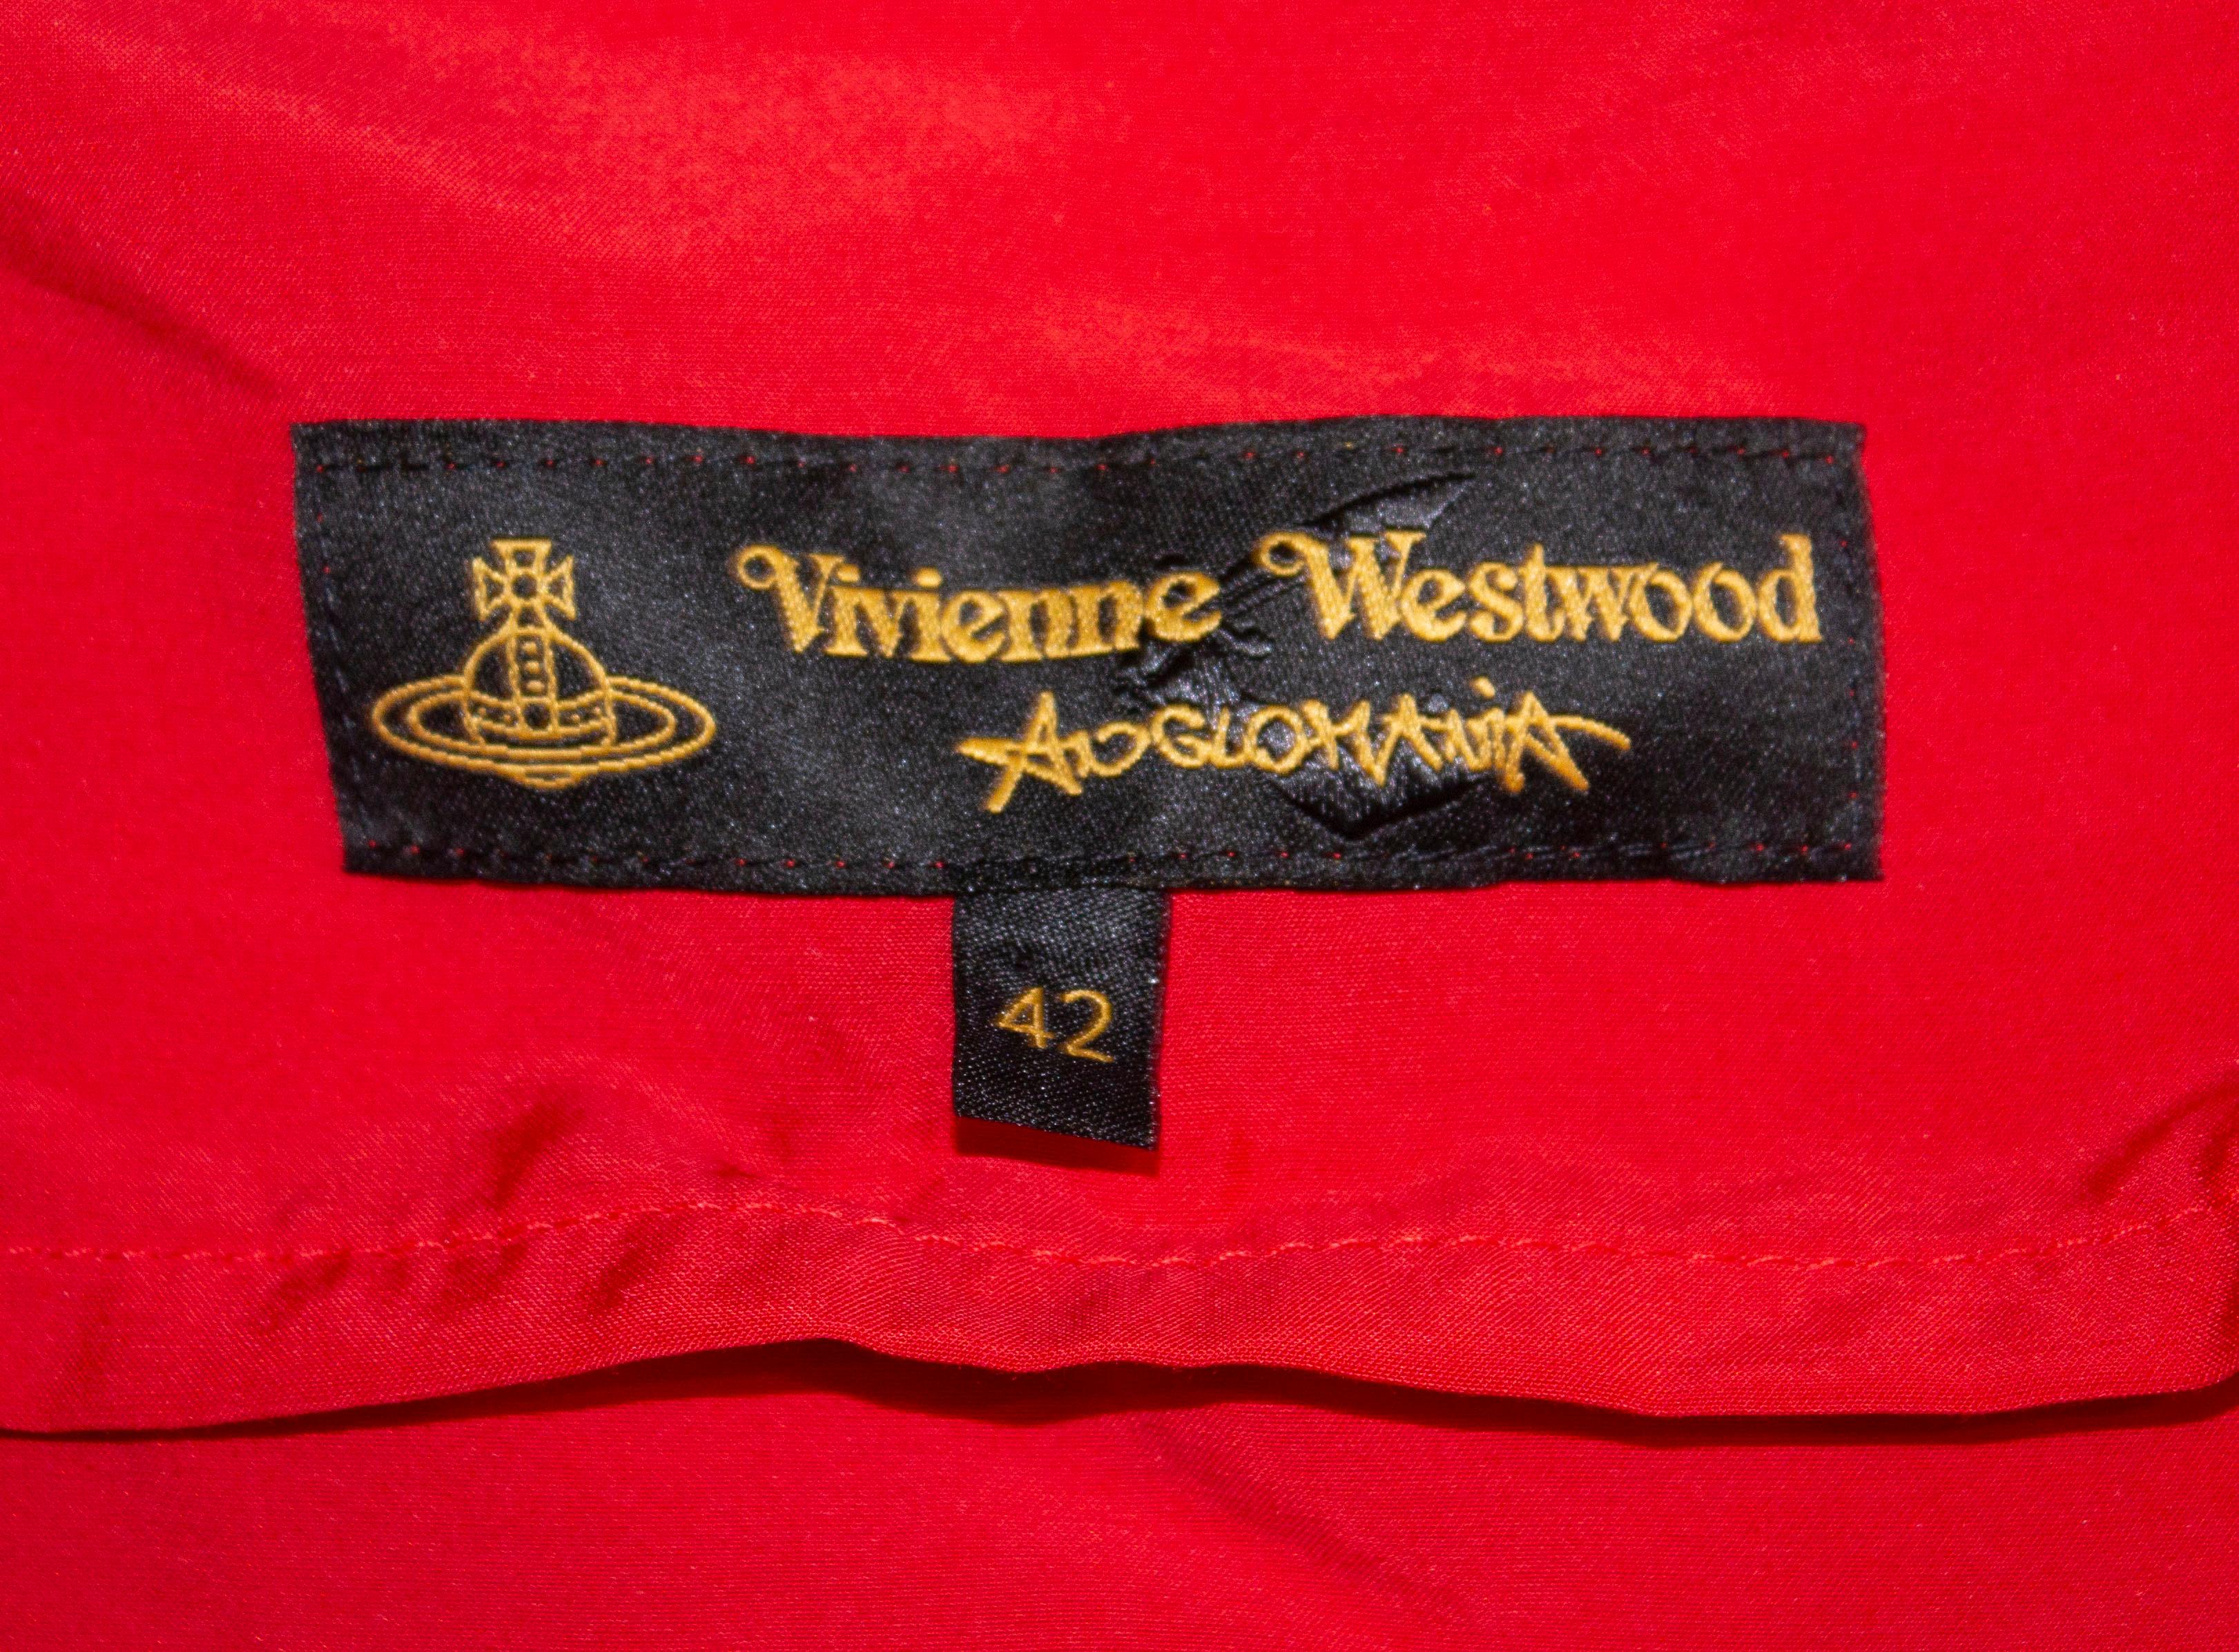 Vivienne Westwood Anglomania Red Top 1